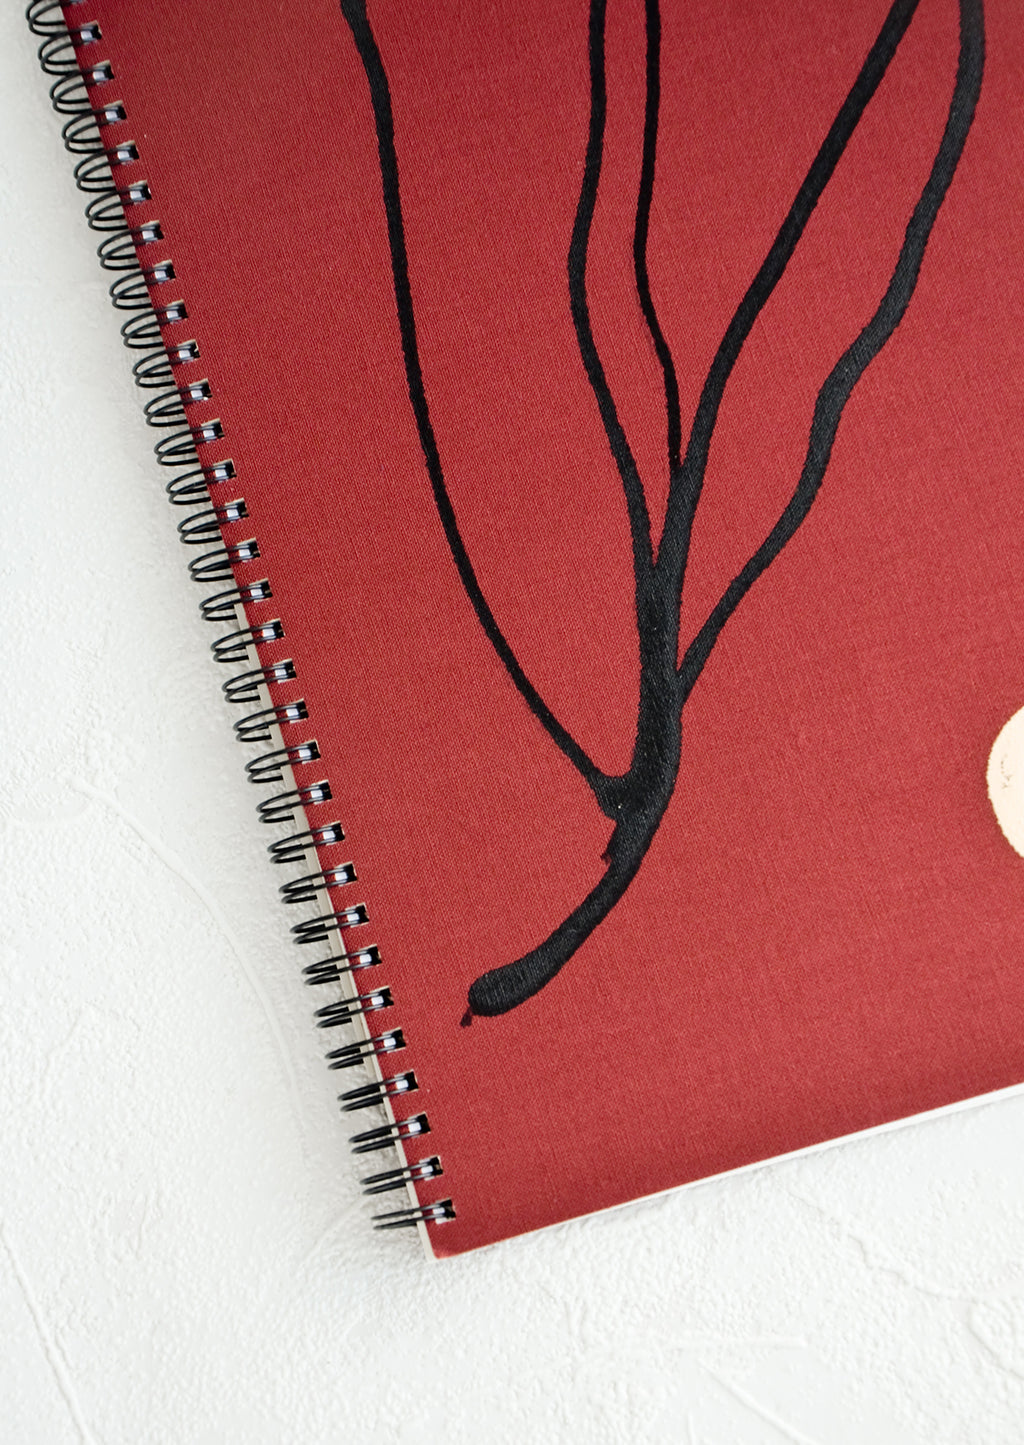 3: Spiral bound sketchbook with dark red book cloth cover 